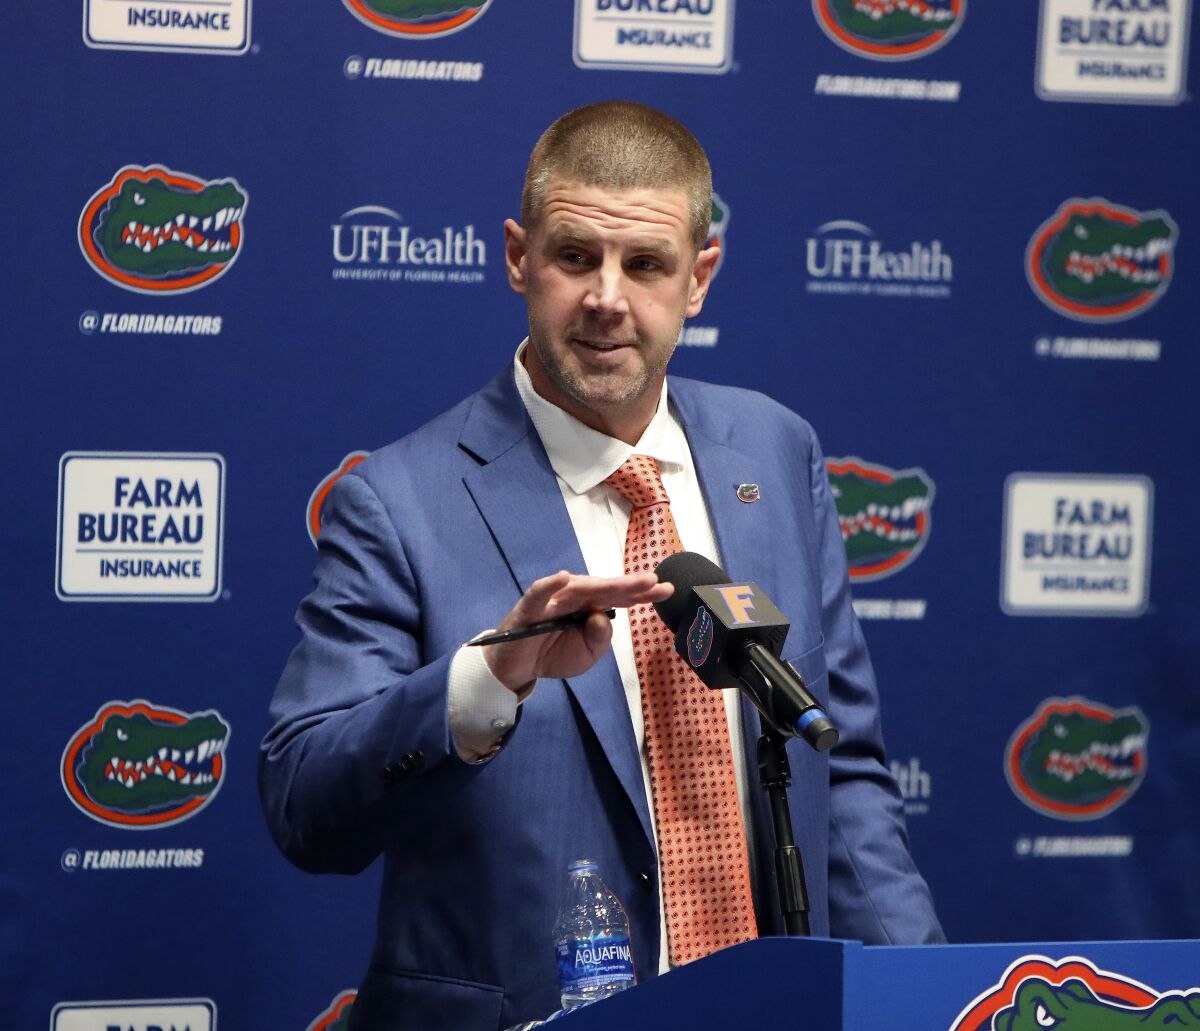 Florida head football coach Billy Napier speaks to the media during his introductory NCAA college football news conference at Ben Hill Griffin Stadium in Gainesville, Fla., Sunday, Dec. 5, 2021. (Brad McClenny/The Gainesville Sun via AP)